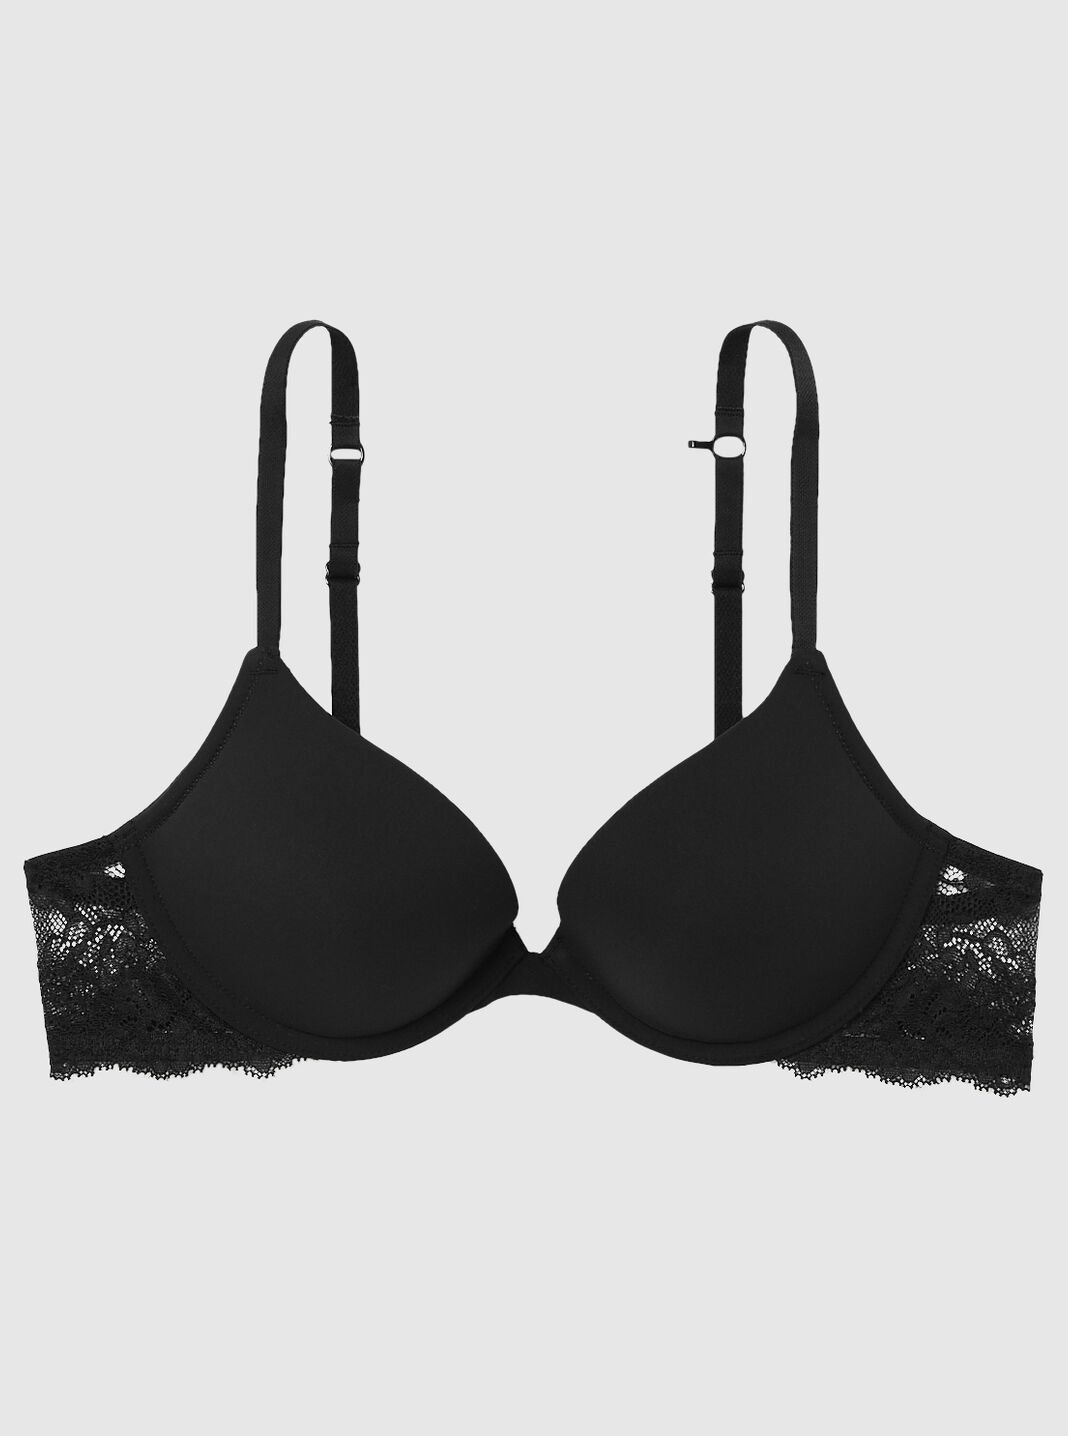 Seamless Push Up Bra For Women Sexy, Thin, And Breathable Bra And Underwear  For Students And Lingerie Enthusiasts From Elroyelissa, $6.31